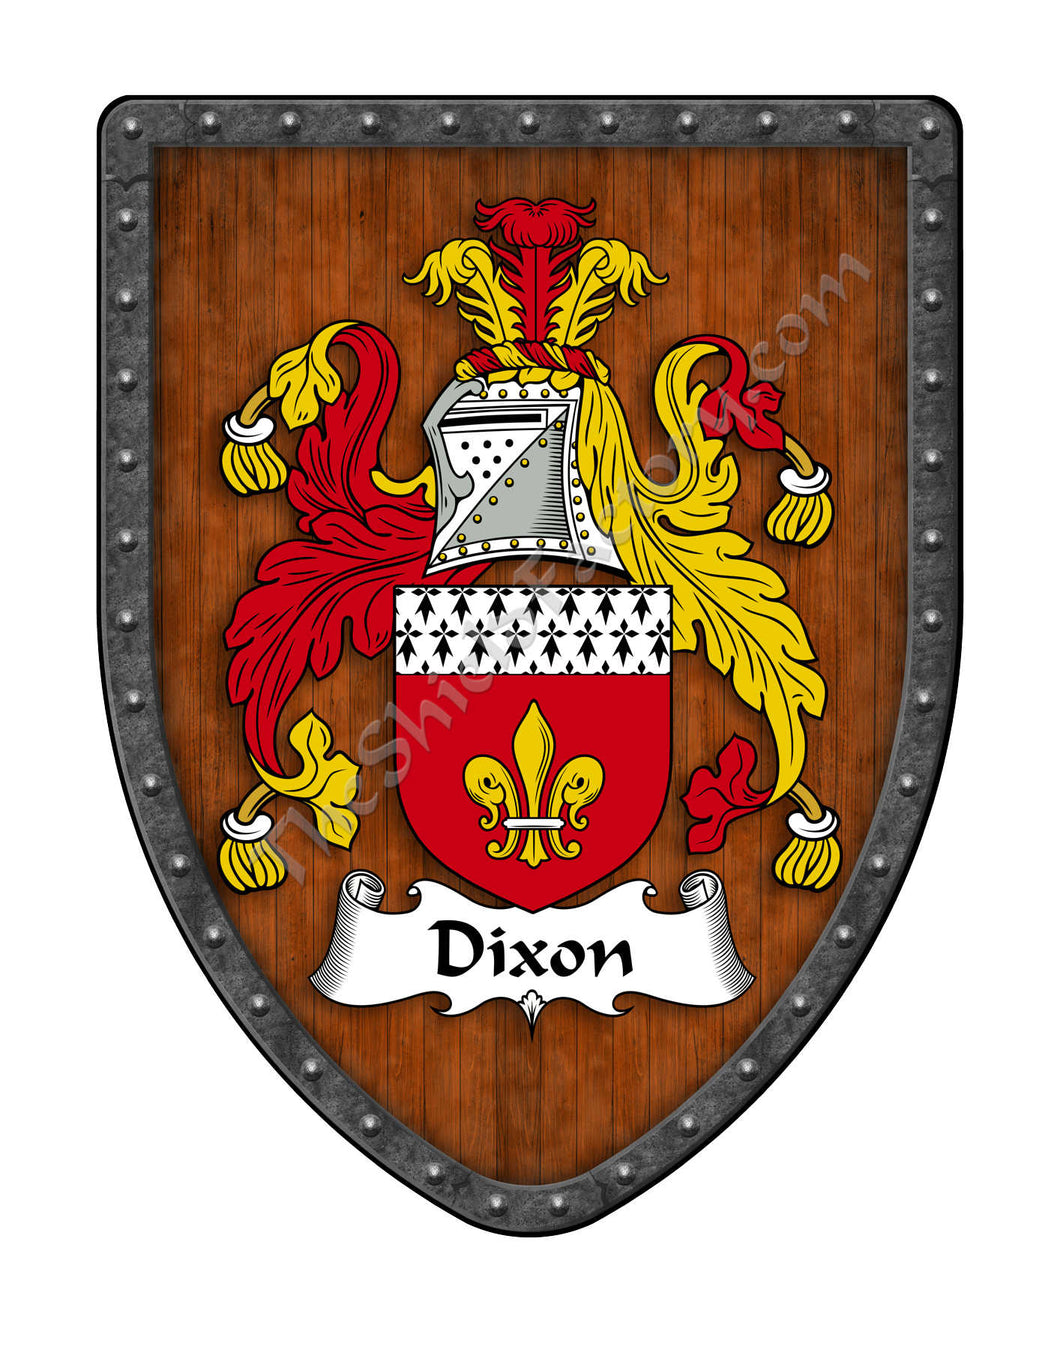 Dixon Coat of Arms Shield Family Crest